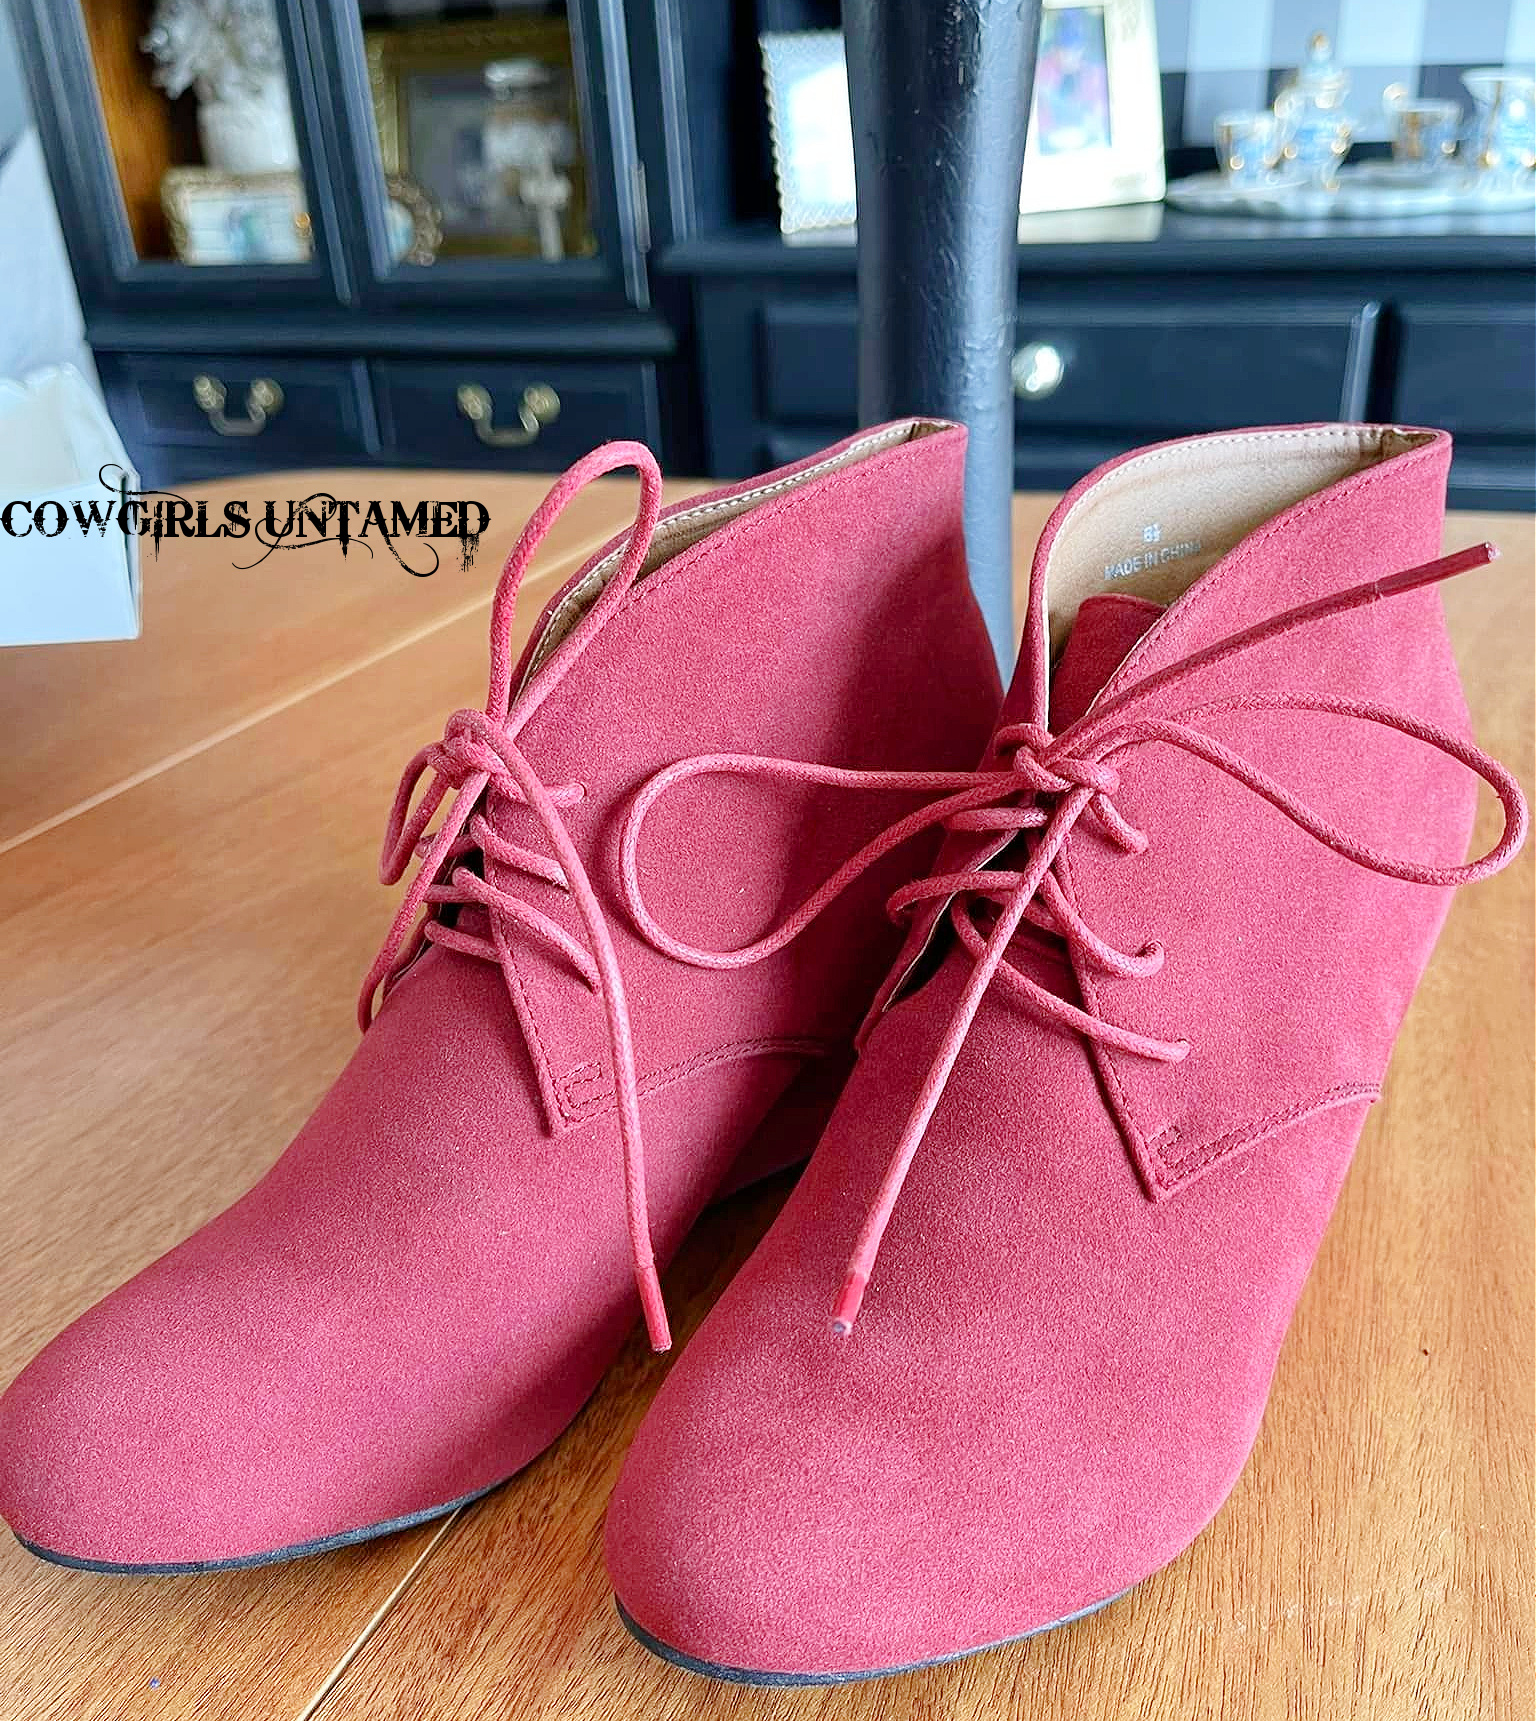 VINTAGE BOOTIES  Lace Up Red Faux Suede Vintage Style Wedge Ankle Booties ONLY 7/7.5 & 8/8.5